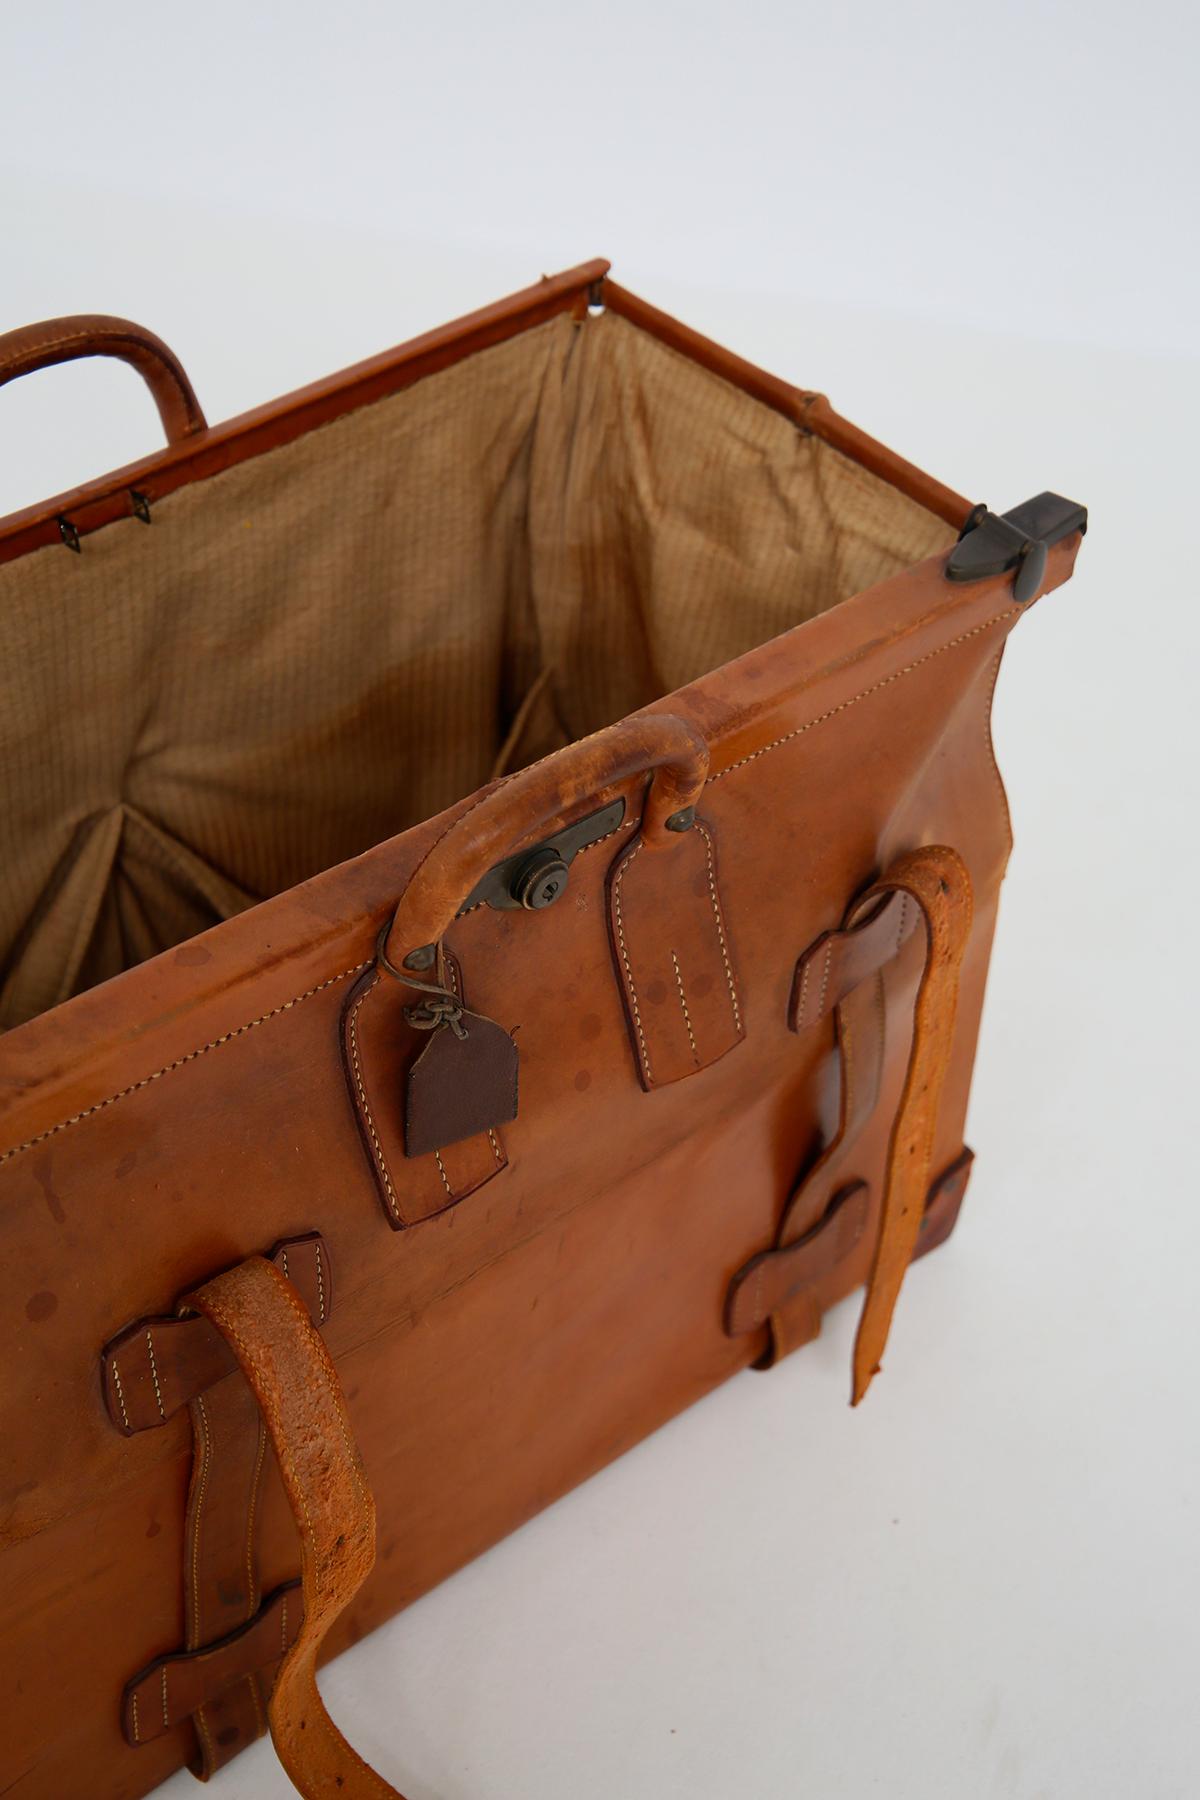 Antique brown leather Gladstone doctor bag vintage leather - Italy 1910 approx.  Gladstone Bag of the highest quality as the craftsmanship is really superb and can be described as being on par with LV. Thick leather coated on the outside, inner